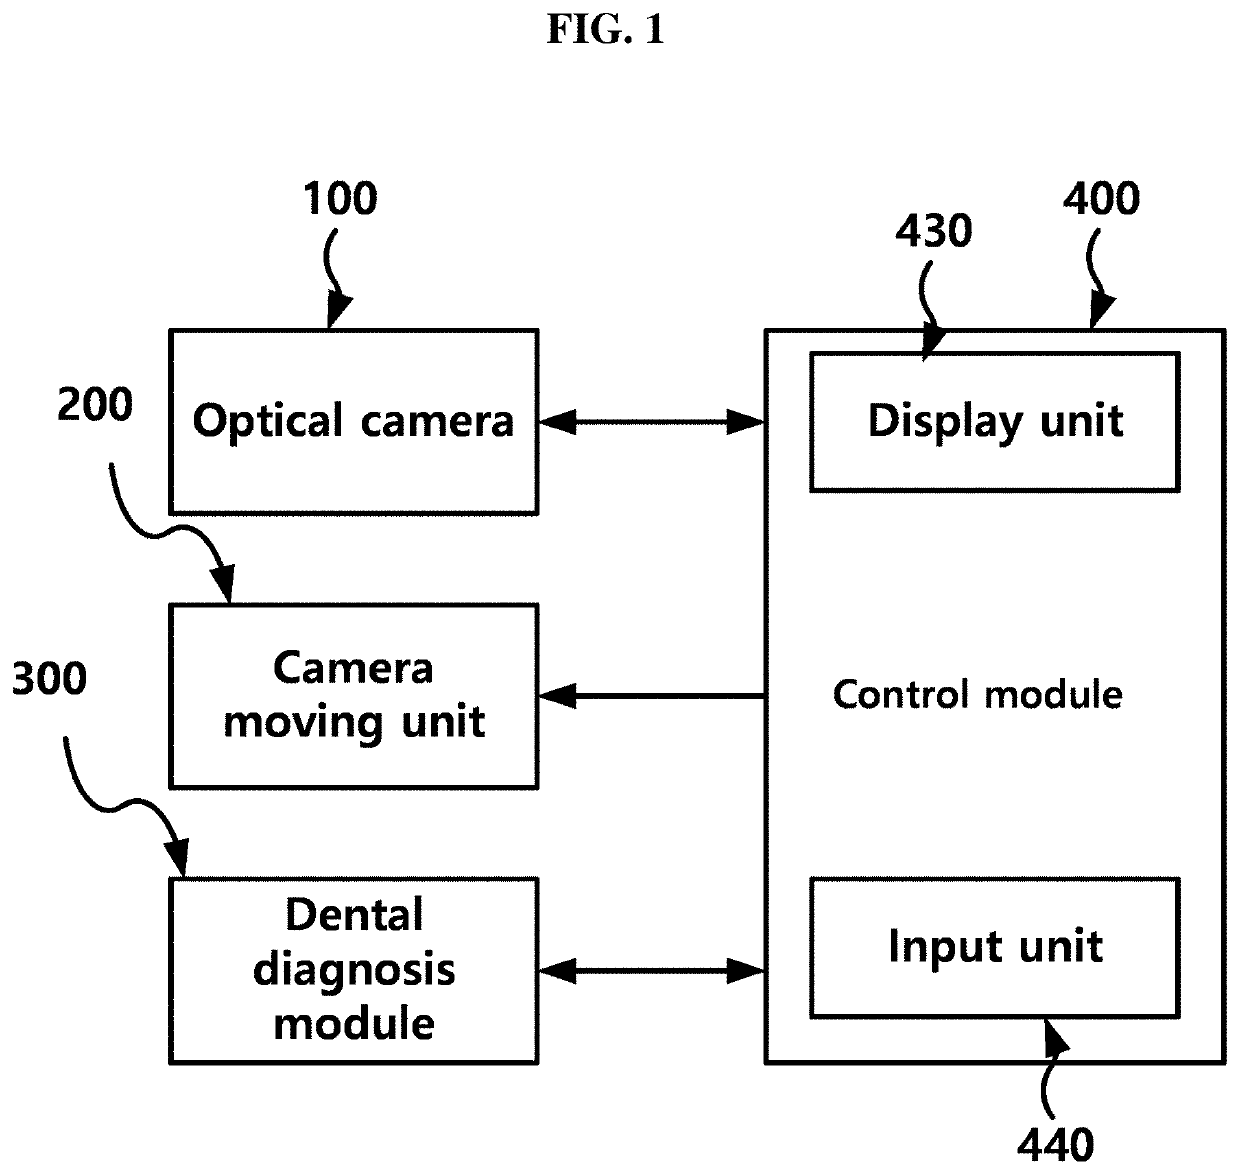 Apparatus and method for acquiring near infrared-based diagnostic images of teeth